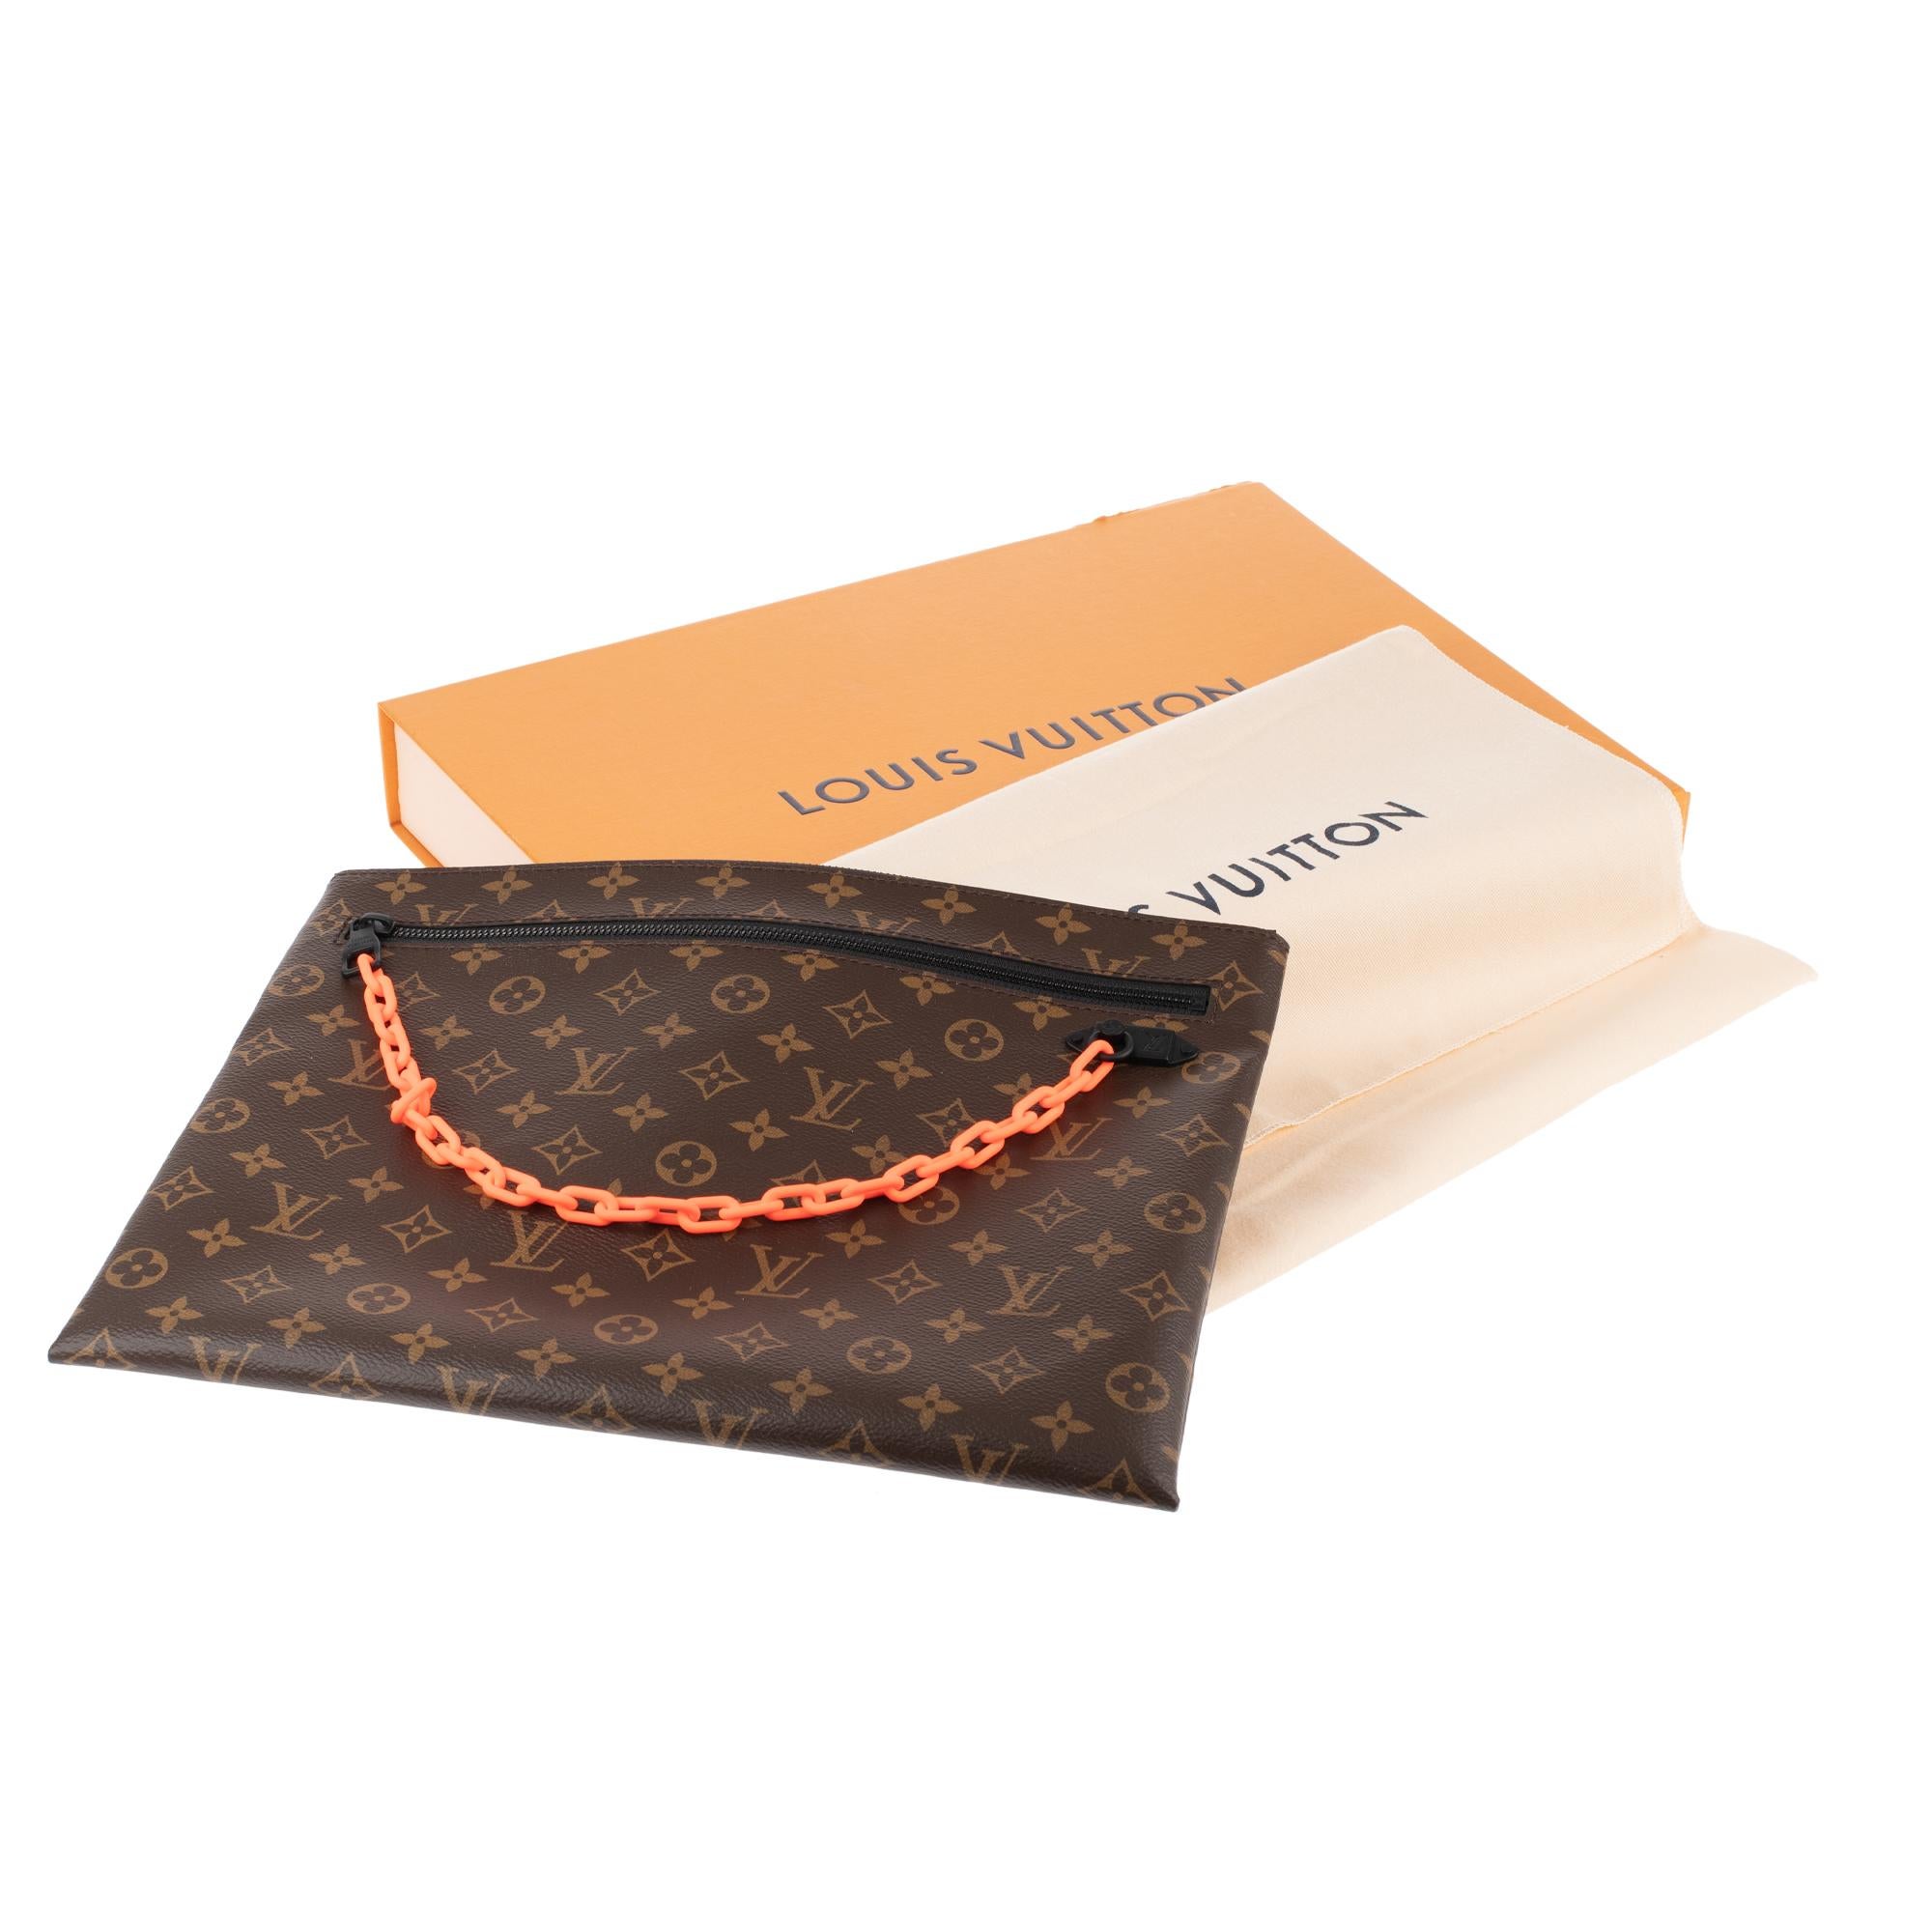 Sold Out - Brand new Louis Vuitton Pouch Virgil Abloh limited edition 2019 5